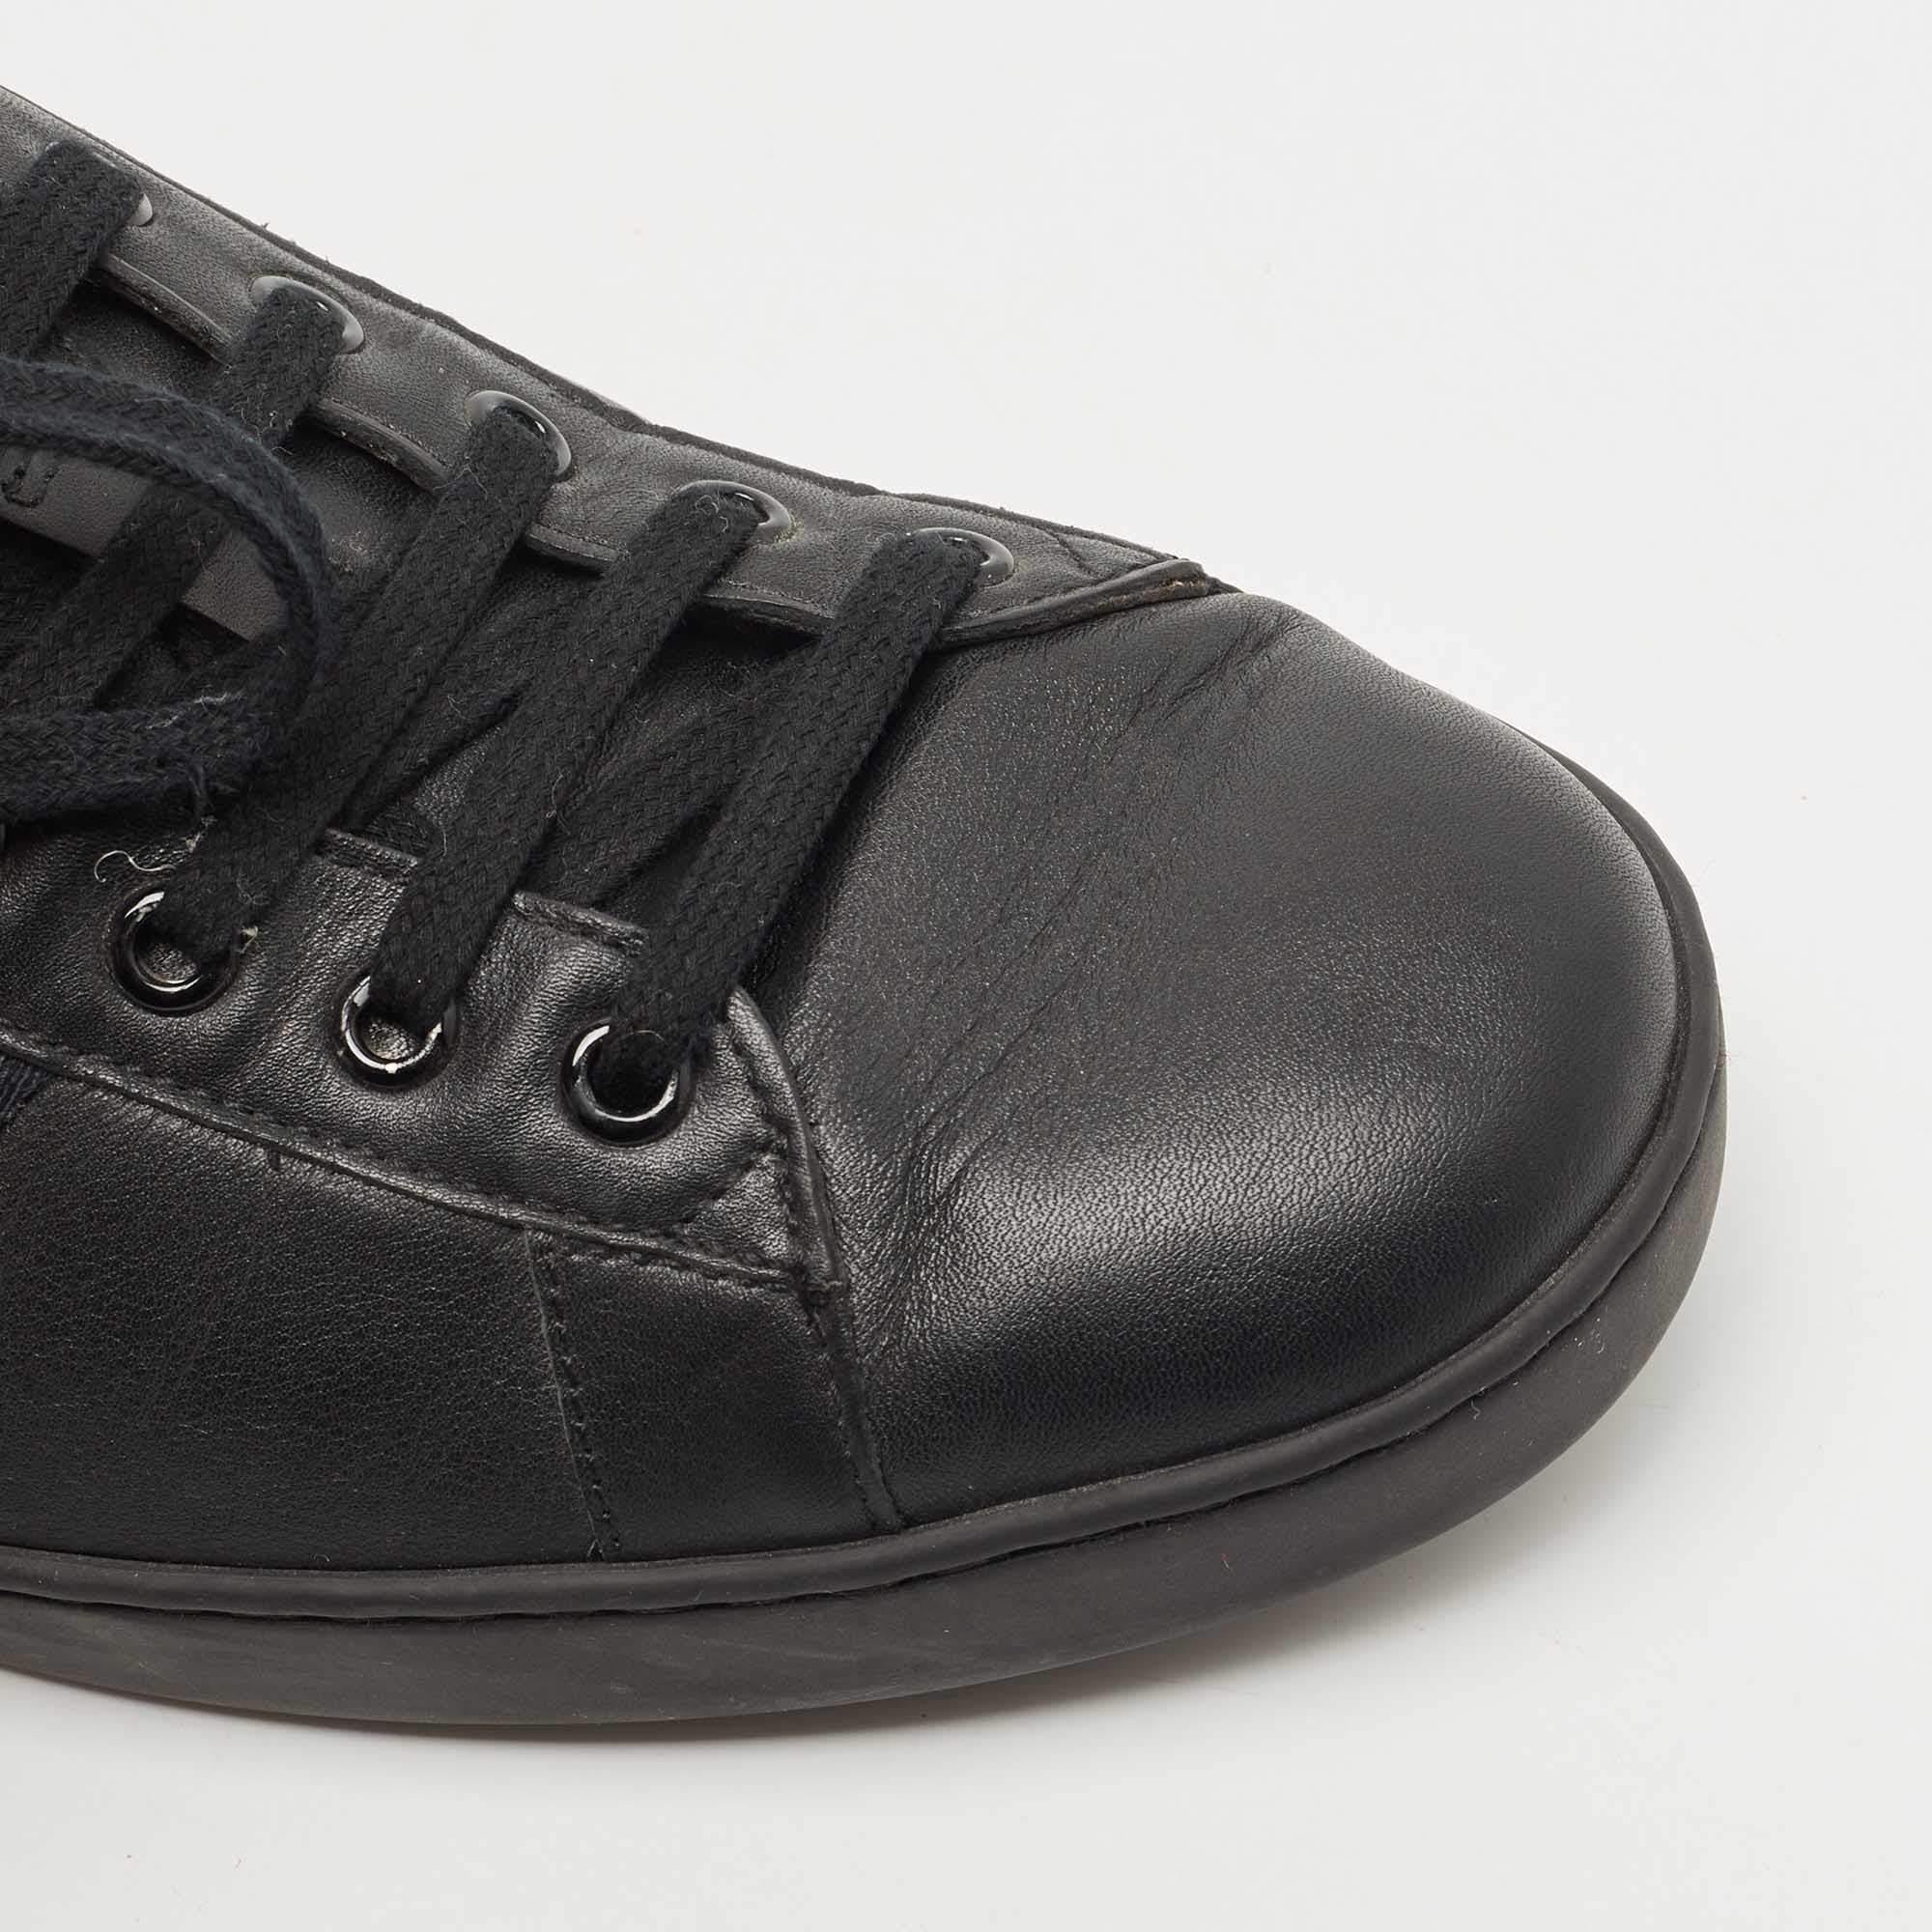 Gucci Black Leather Ace Low Top Sneakers Size 44 2